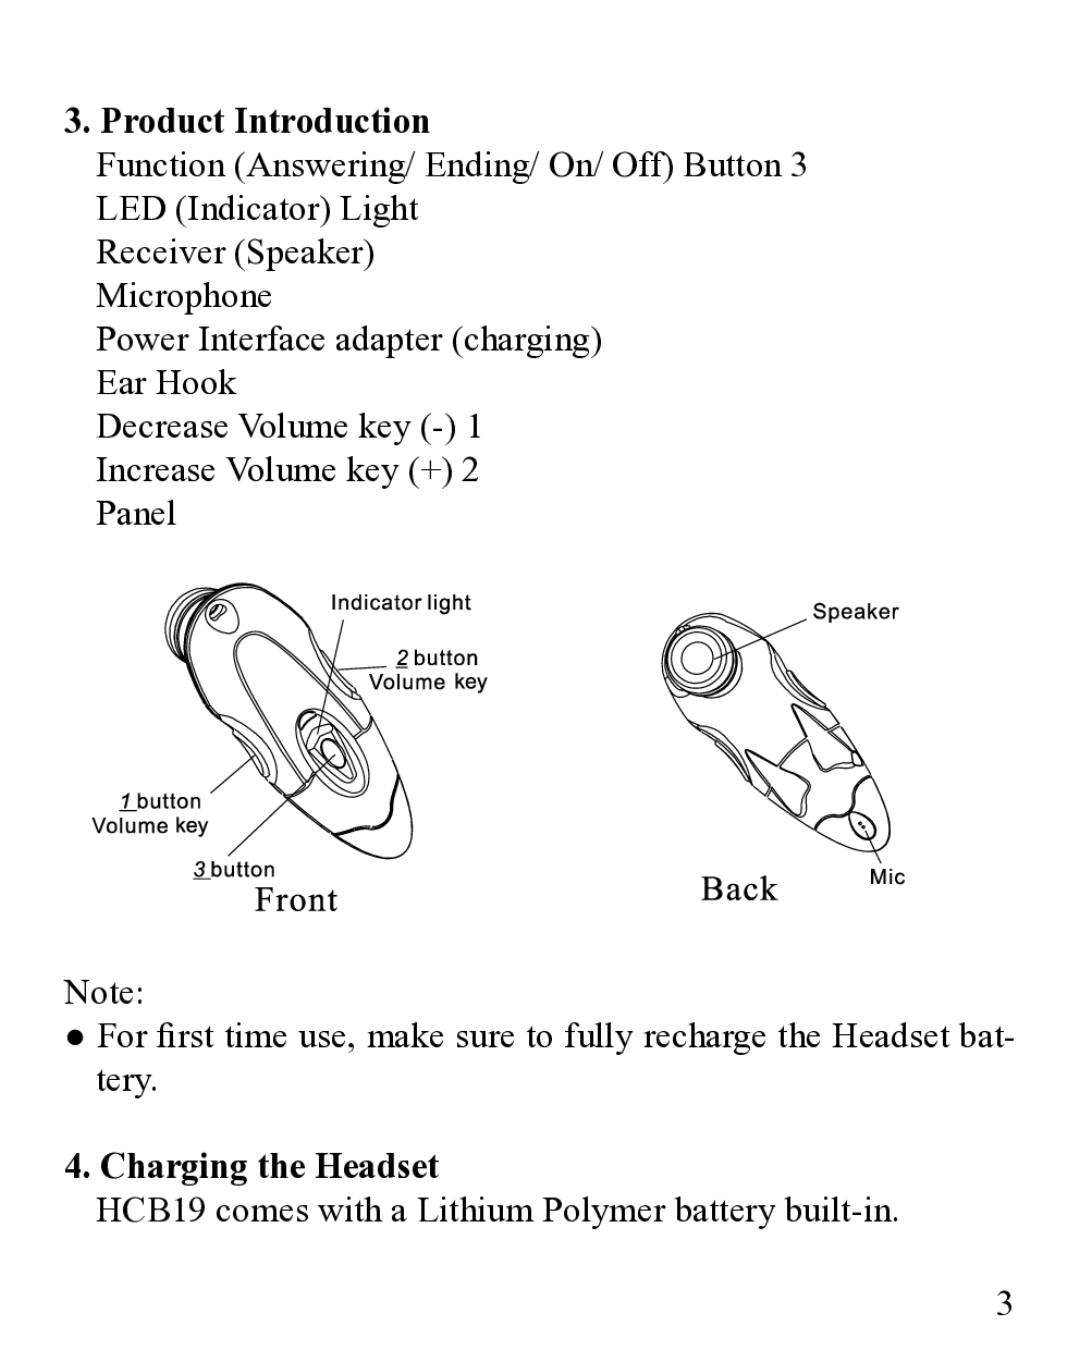 Huey Chiao HCB19 manual Product Introduction, Charging the Headset 